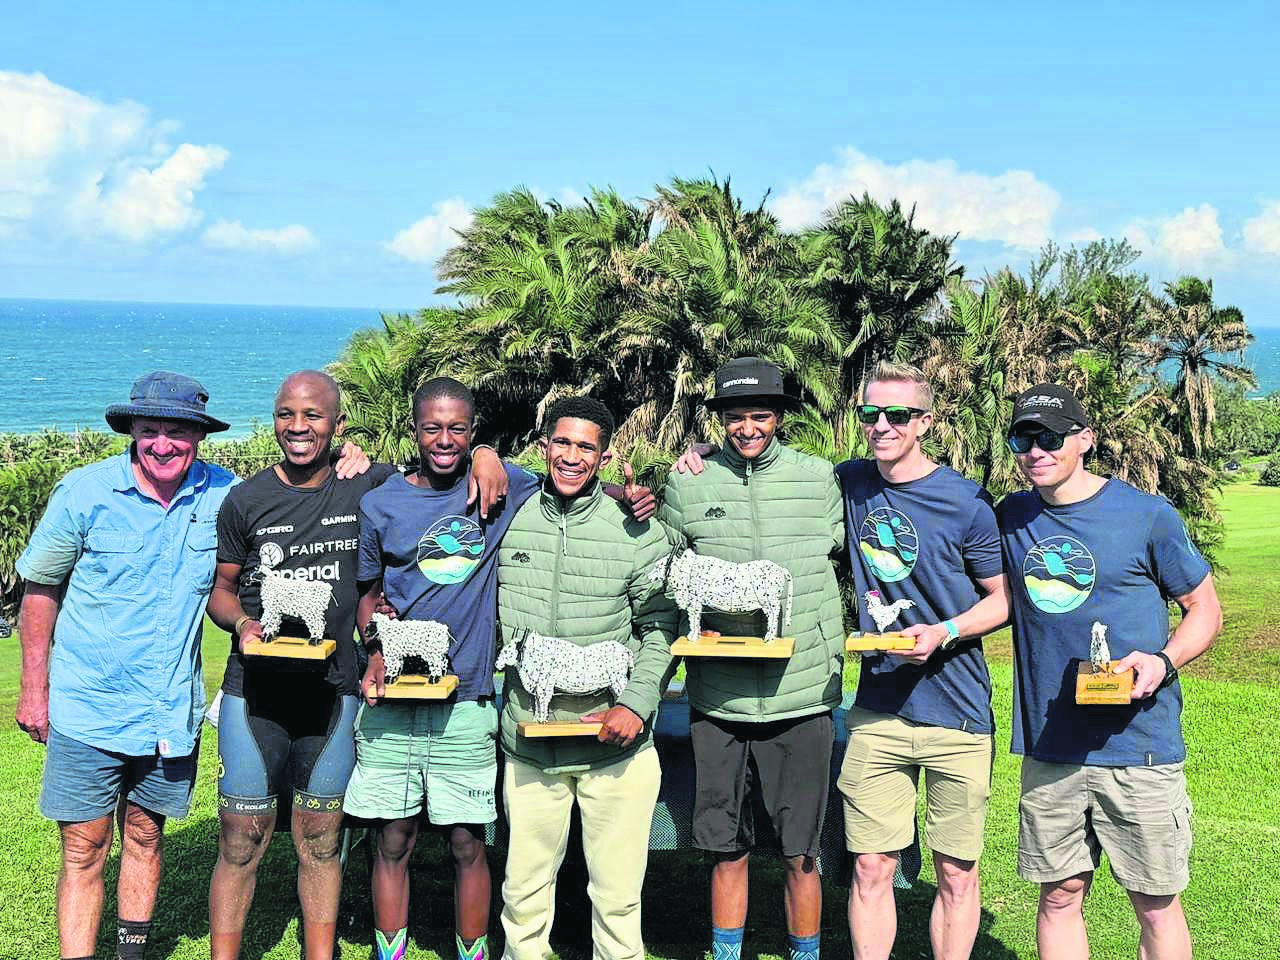 Three teams of Fairtree DP World Cannondale participated in this past weekend’s KAP sani2c mountain-biking adventure in KwaZulu-Natal, with two teams finishing at the top of the podium. The teams comprised: Ziandro Jordaan and Damon Terblanche; Kusaselhile Ngidi and Ongeziwe Tyapa; and Thando Nthuthu and Unathi Msophi. All three teams recorded great times over the three stages, but in the end Jordaan and Terblanche finished first in the general classification, while Ngidi and Tyapa came in second place. Nthuthu and Msophi finished 103rd overall. Said team manager Chris Norton: “Only Lihle [Ngidi] rode sani2c last year, so no other riders had any knowledge or experience of the course. To come first and second is an exceptional result and we are really proud of all the riders. It was great to see the madalasUnathi Msophi and Thando Nthuthu taking part in a race again, and thanks to them for doing all the driving over the two days, to get the team safely from Stellenbosch to KZN and back.”